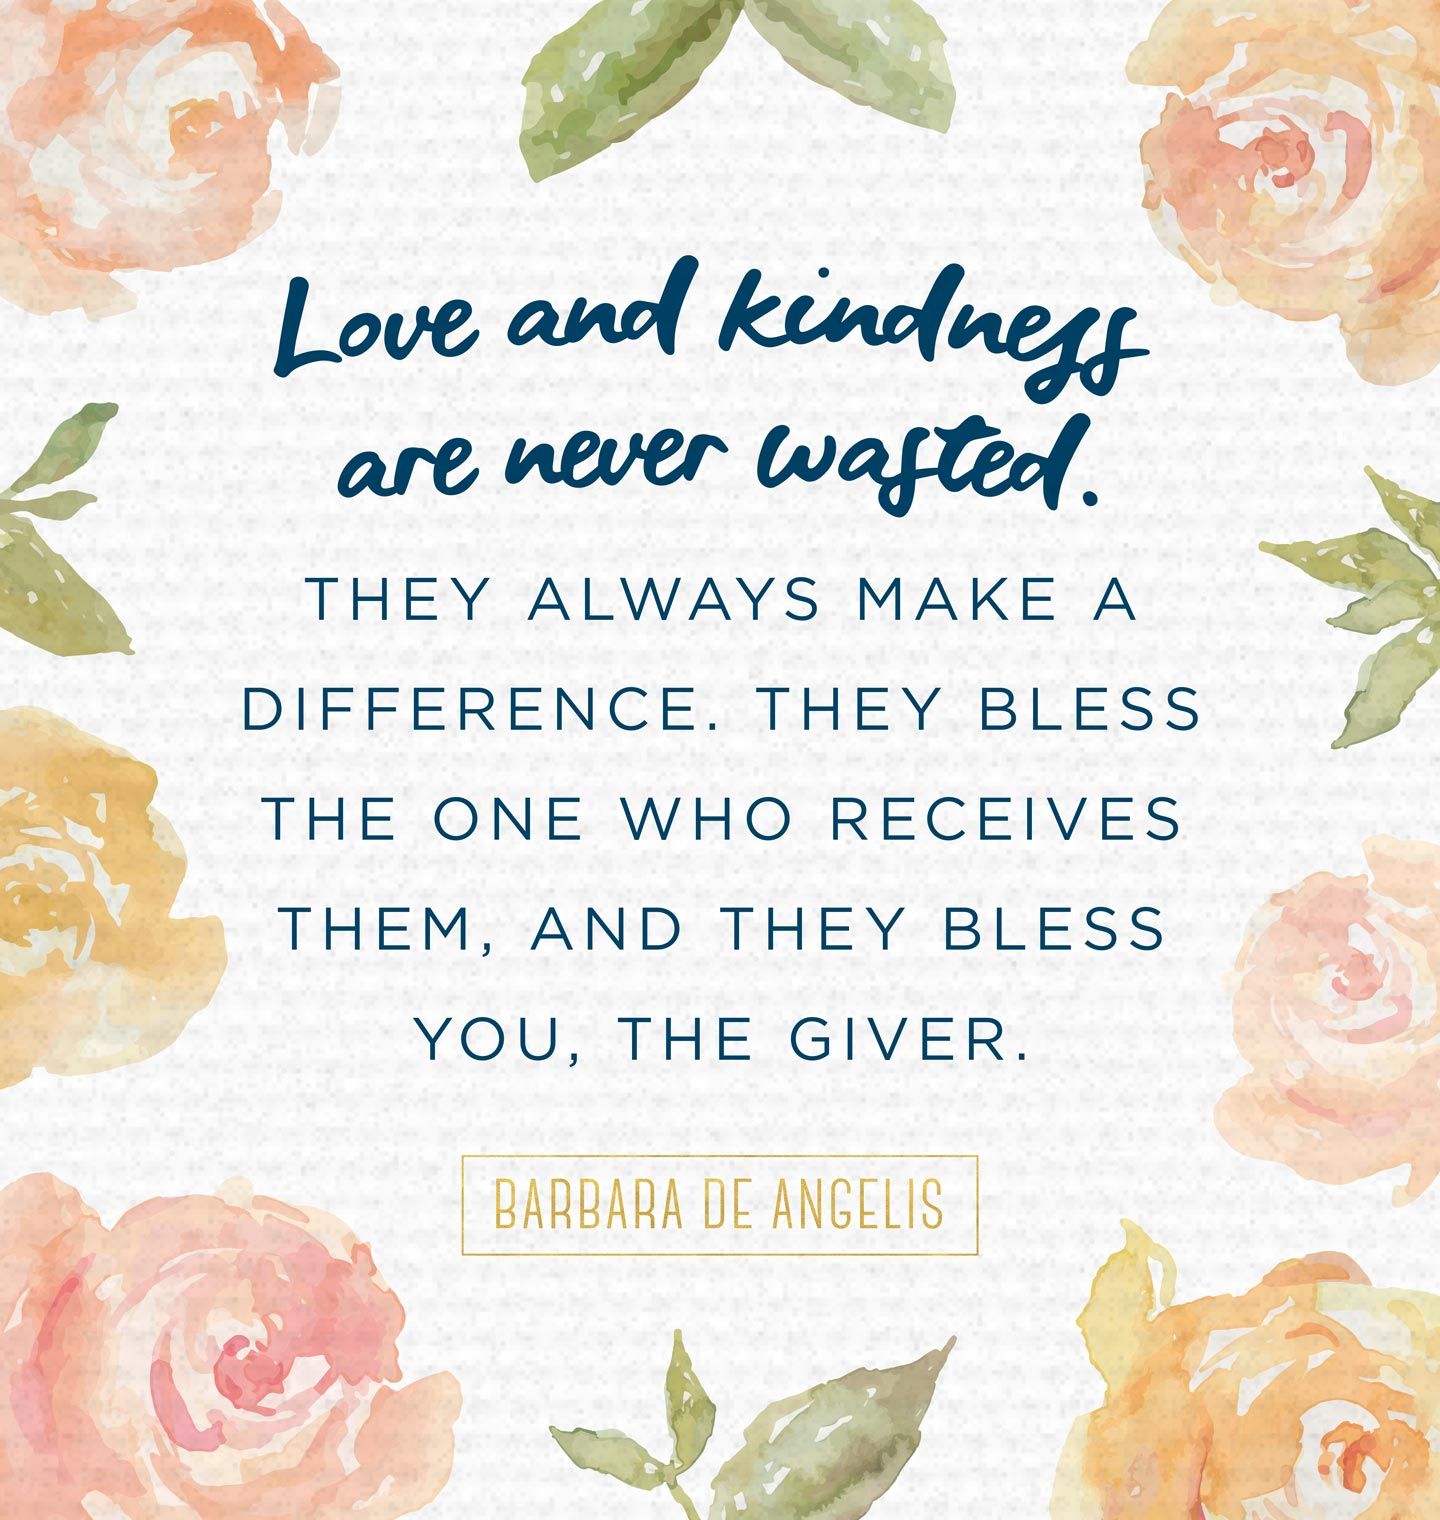 kindness-quote-2.jpg